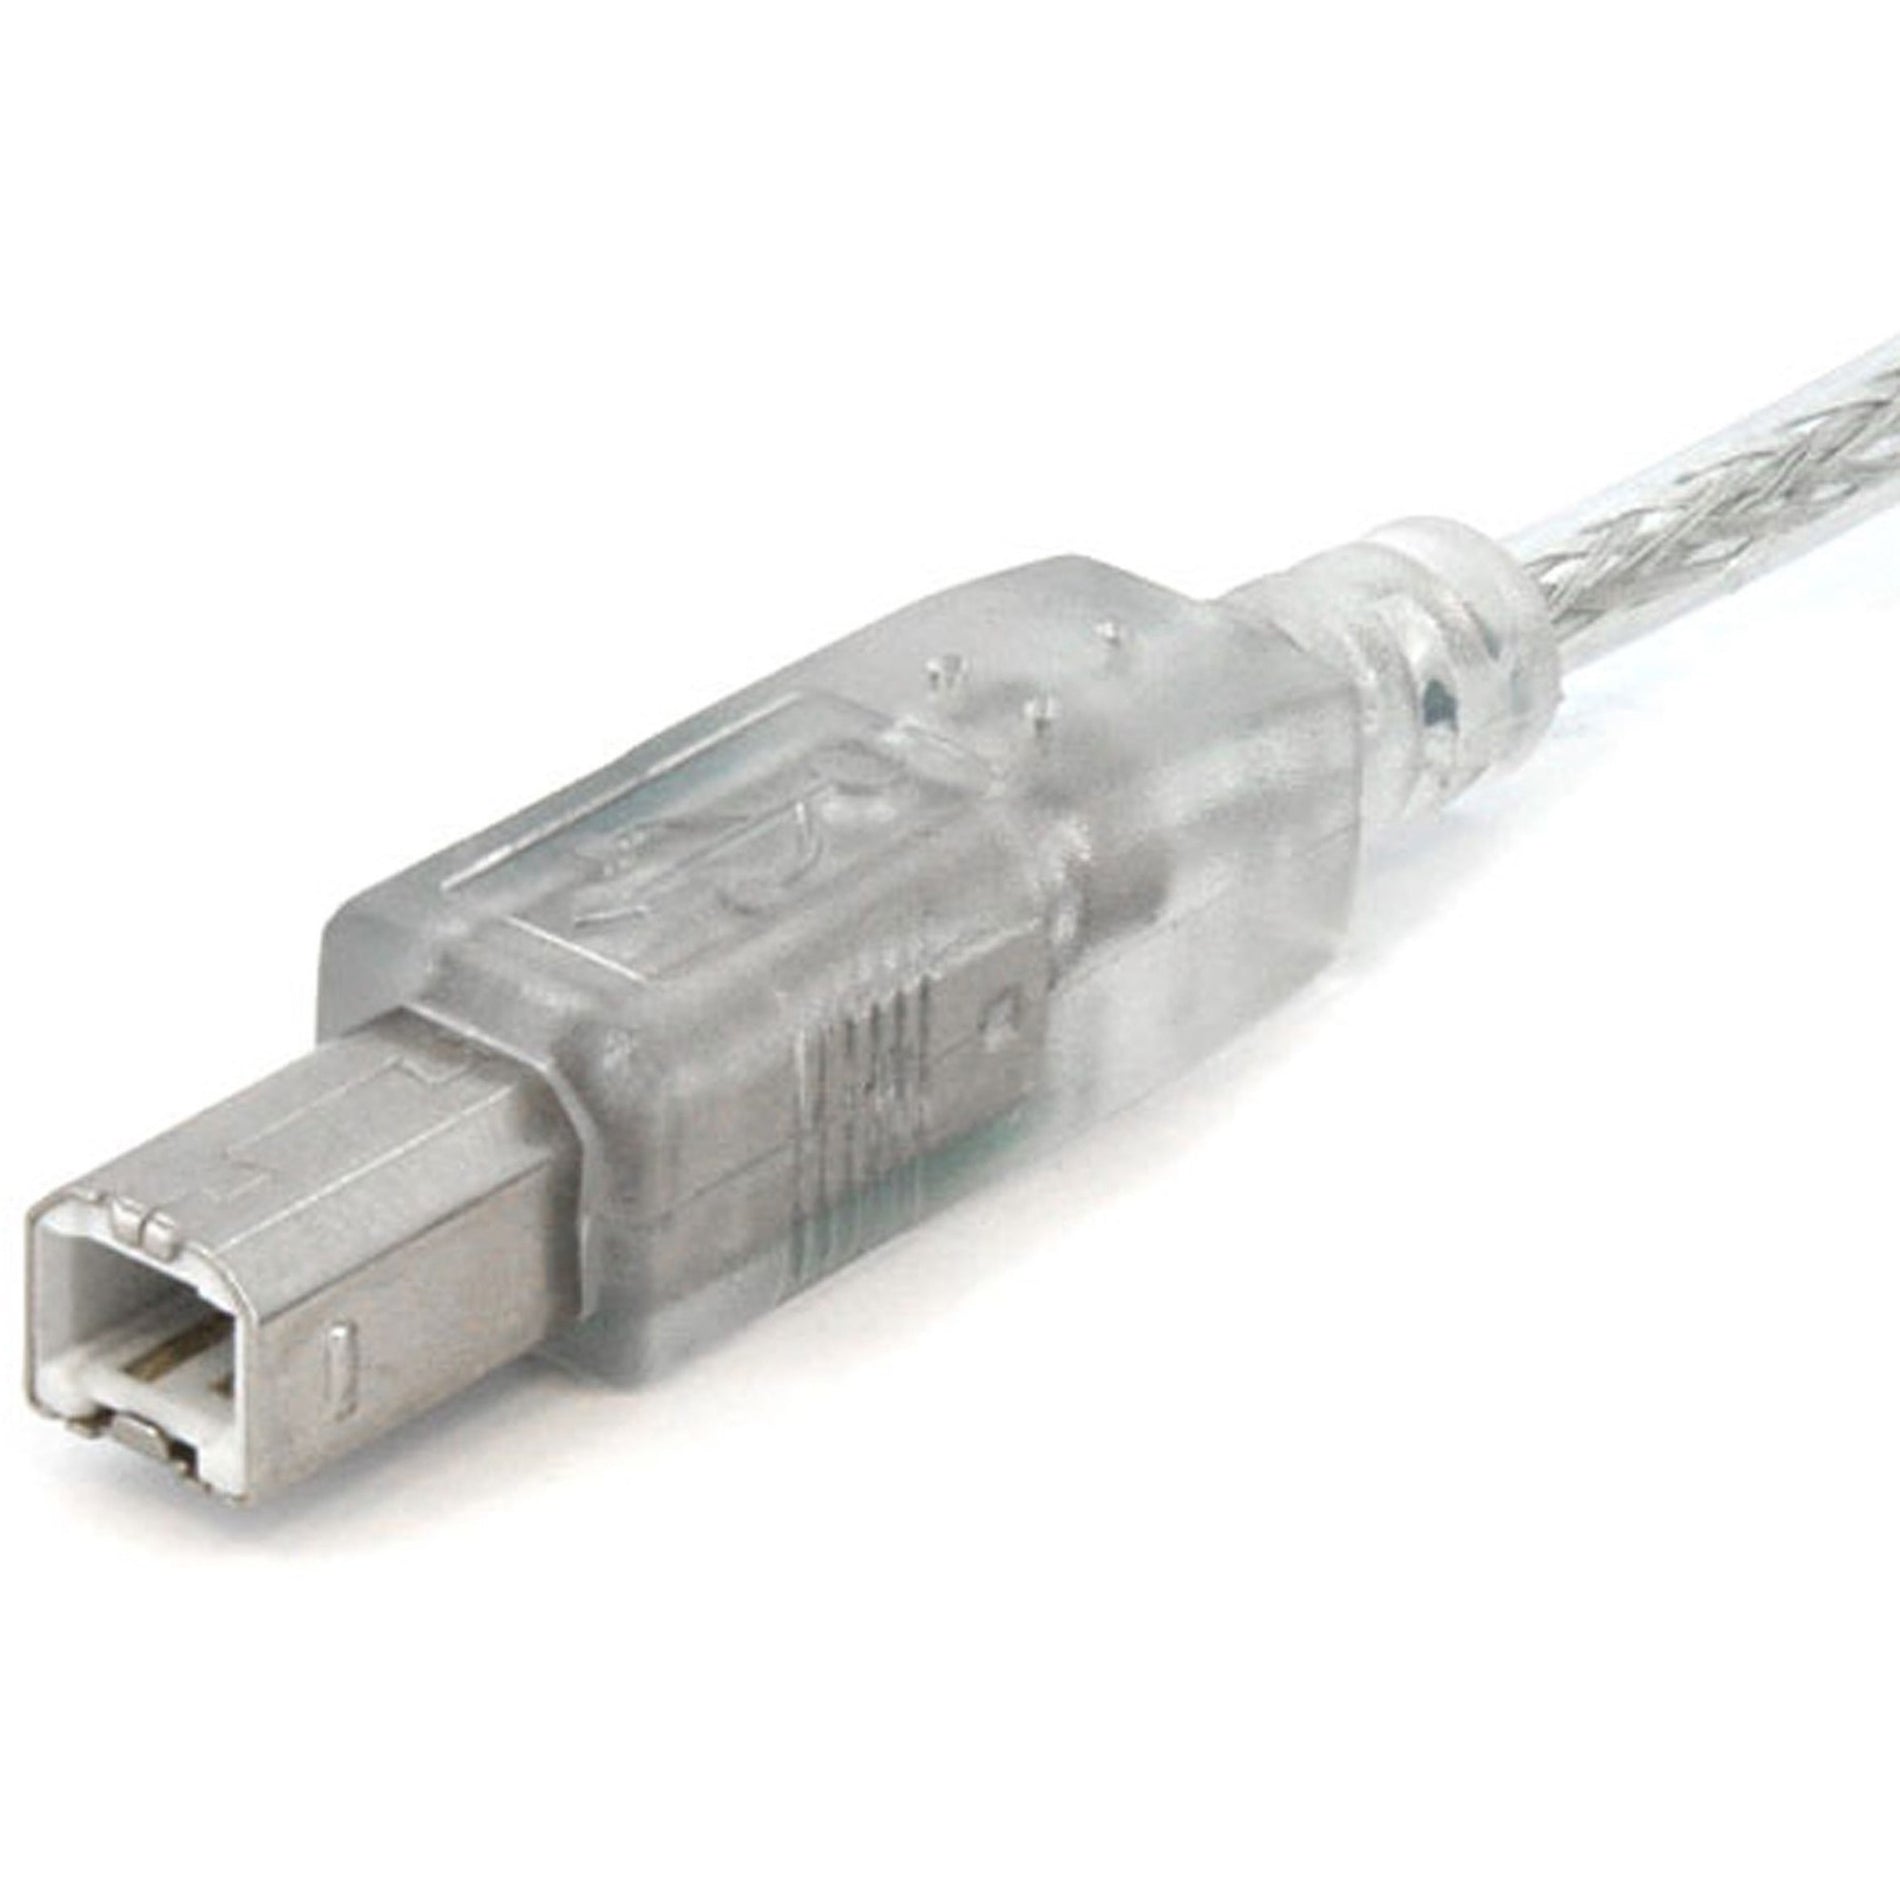 StarTech.com USBFAB10T Transparent USB 2.0 Cable, 10 ft, Data Transfer Cable